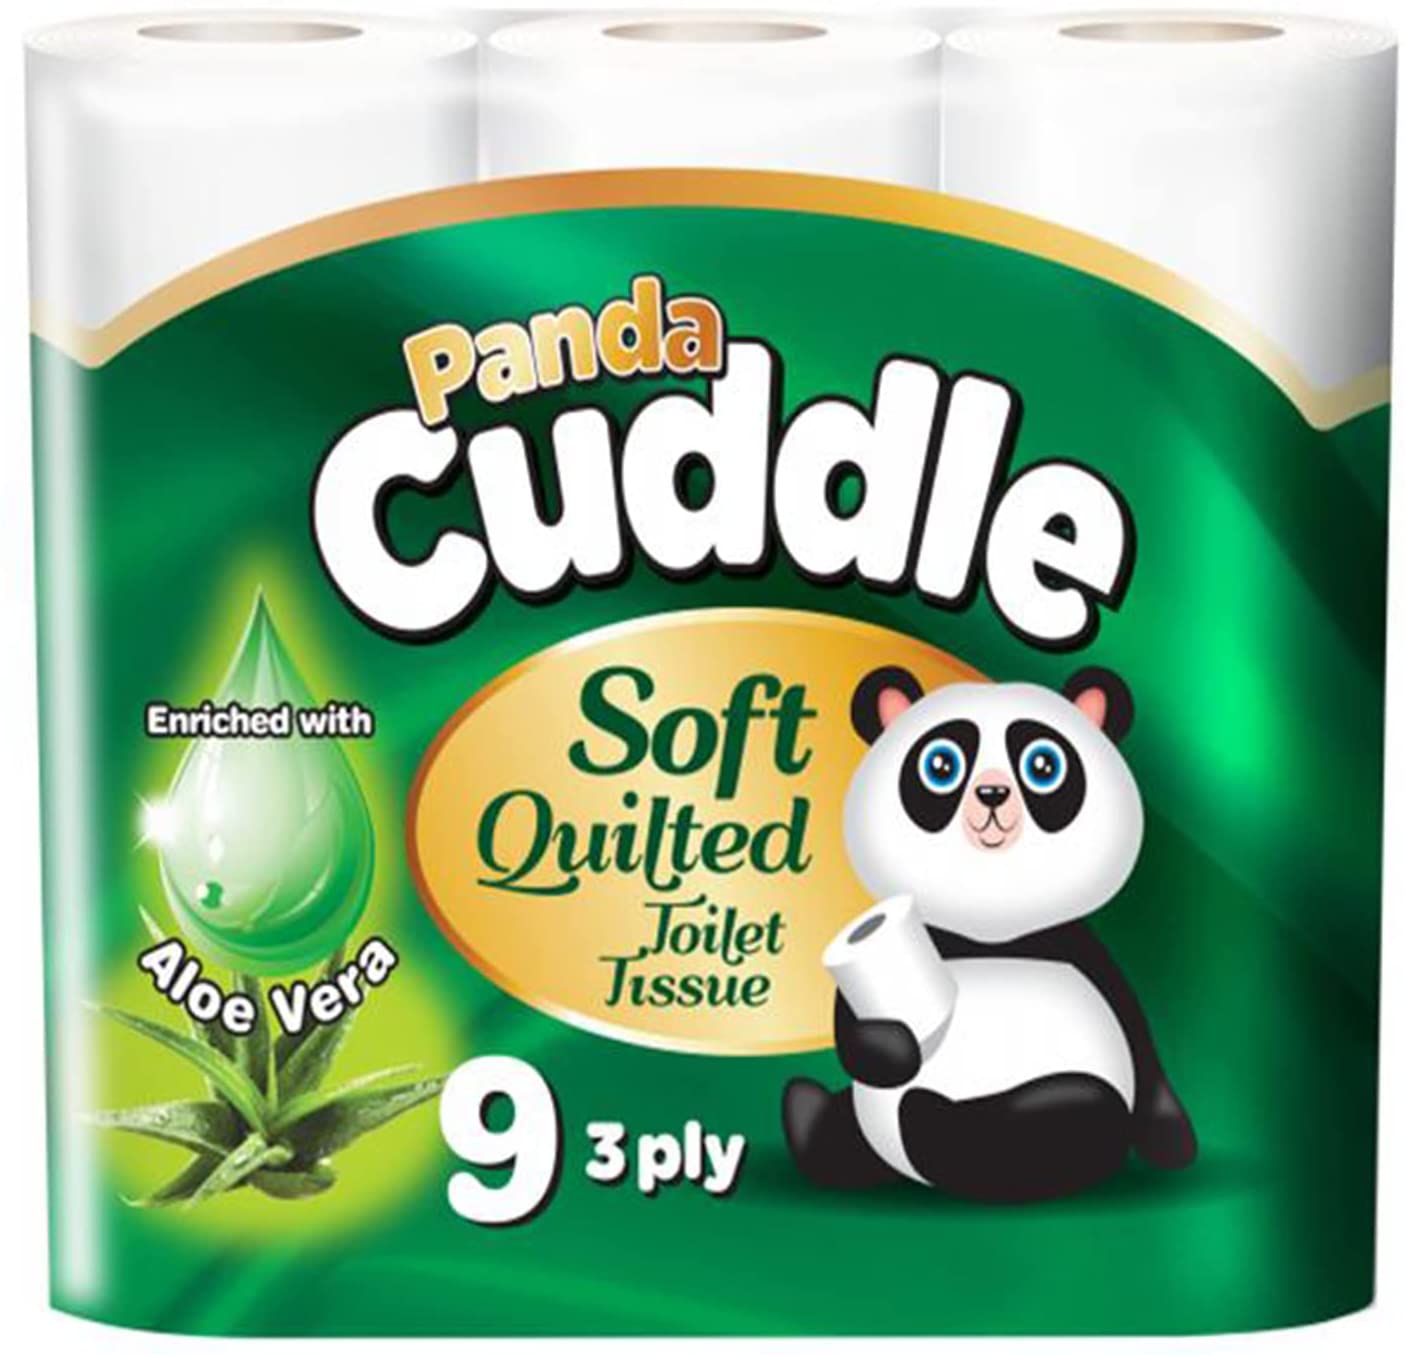 90 Rolls Panda Cuddle Aloe Vera Soft Quilted 3 Ply 160 Sheets Toilet Tissue Rolls